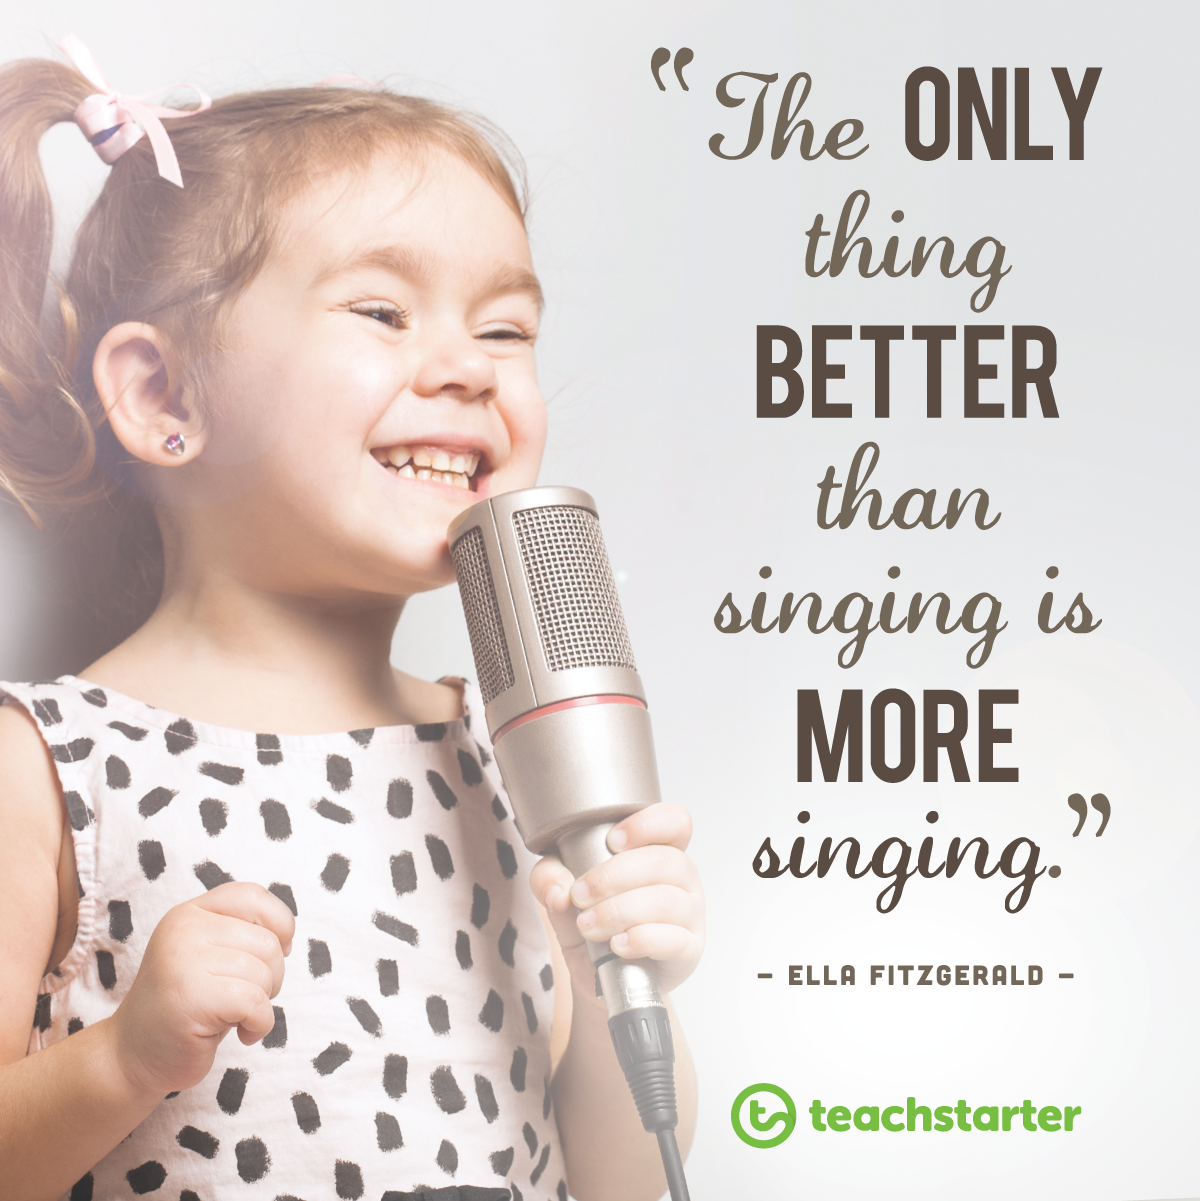 'the only thing b etter than singing is more singing' quote beside image of a young girl with a microphone